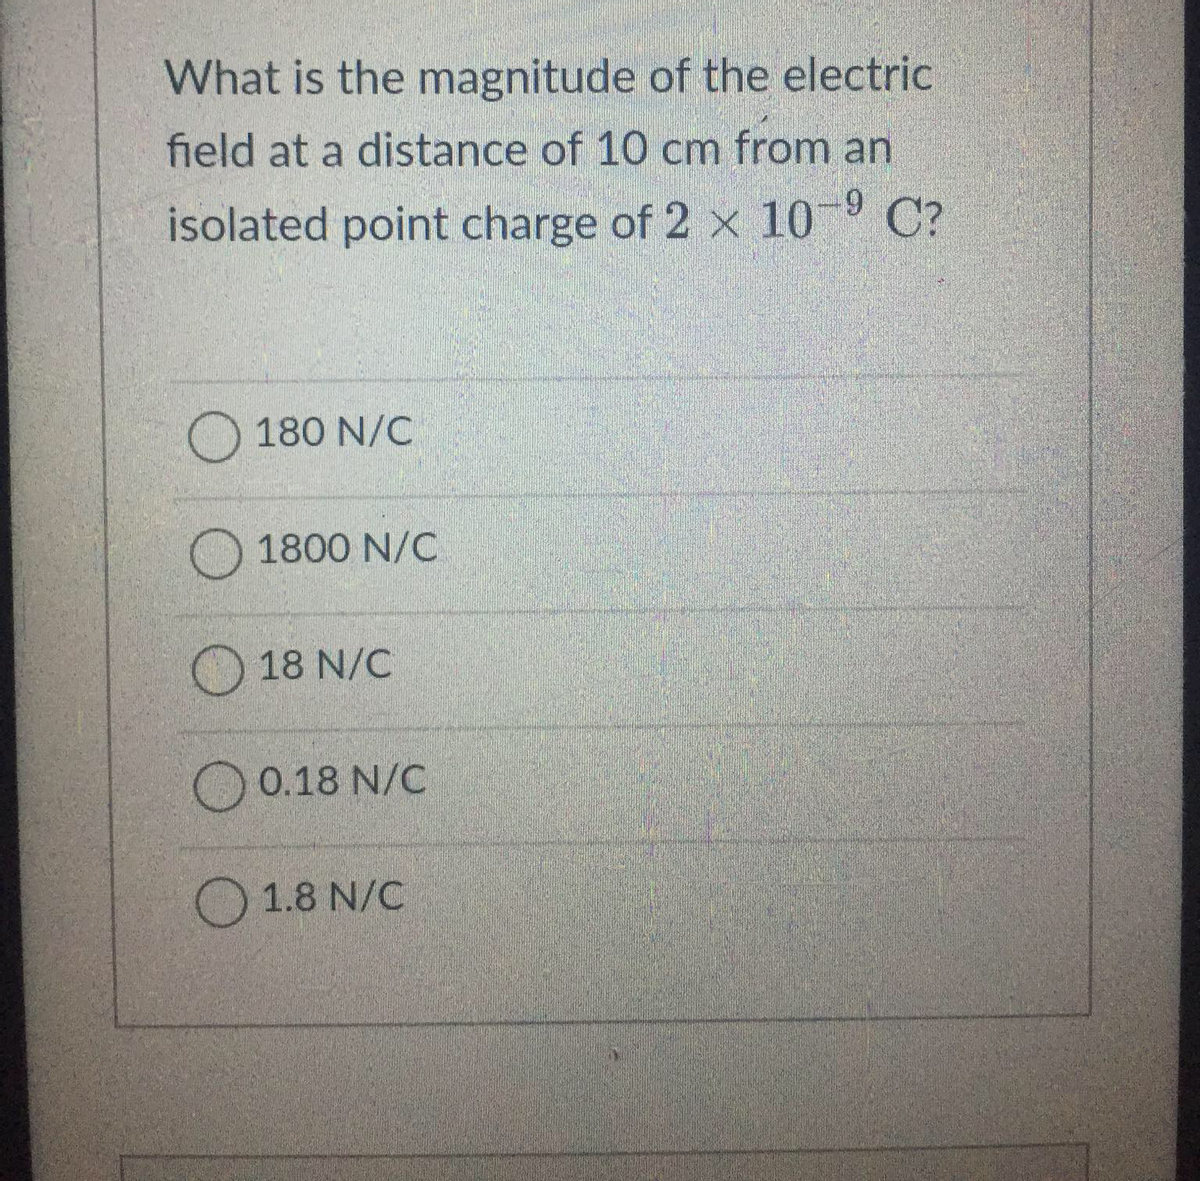 What is the magnitude of the electric
field at a distance of 10 cm from an
isolated point charge of 2 x 10-9 C?
180 N/C
1800 N/C
18 N/C
0.18 N/C
1.8 N/C